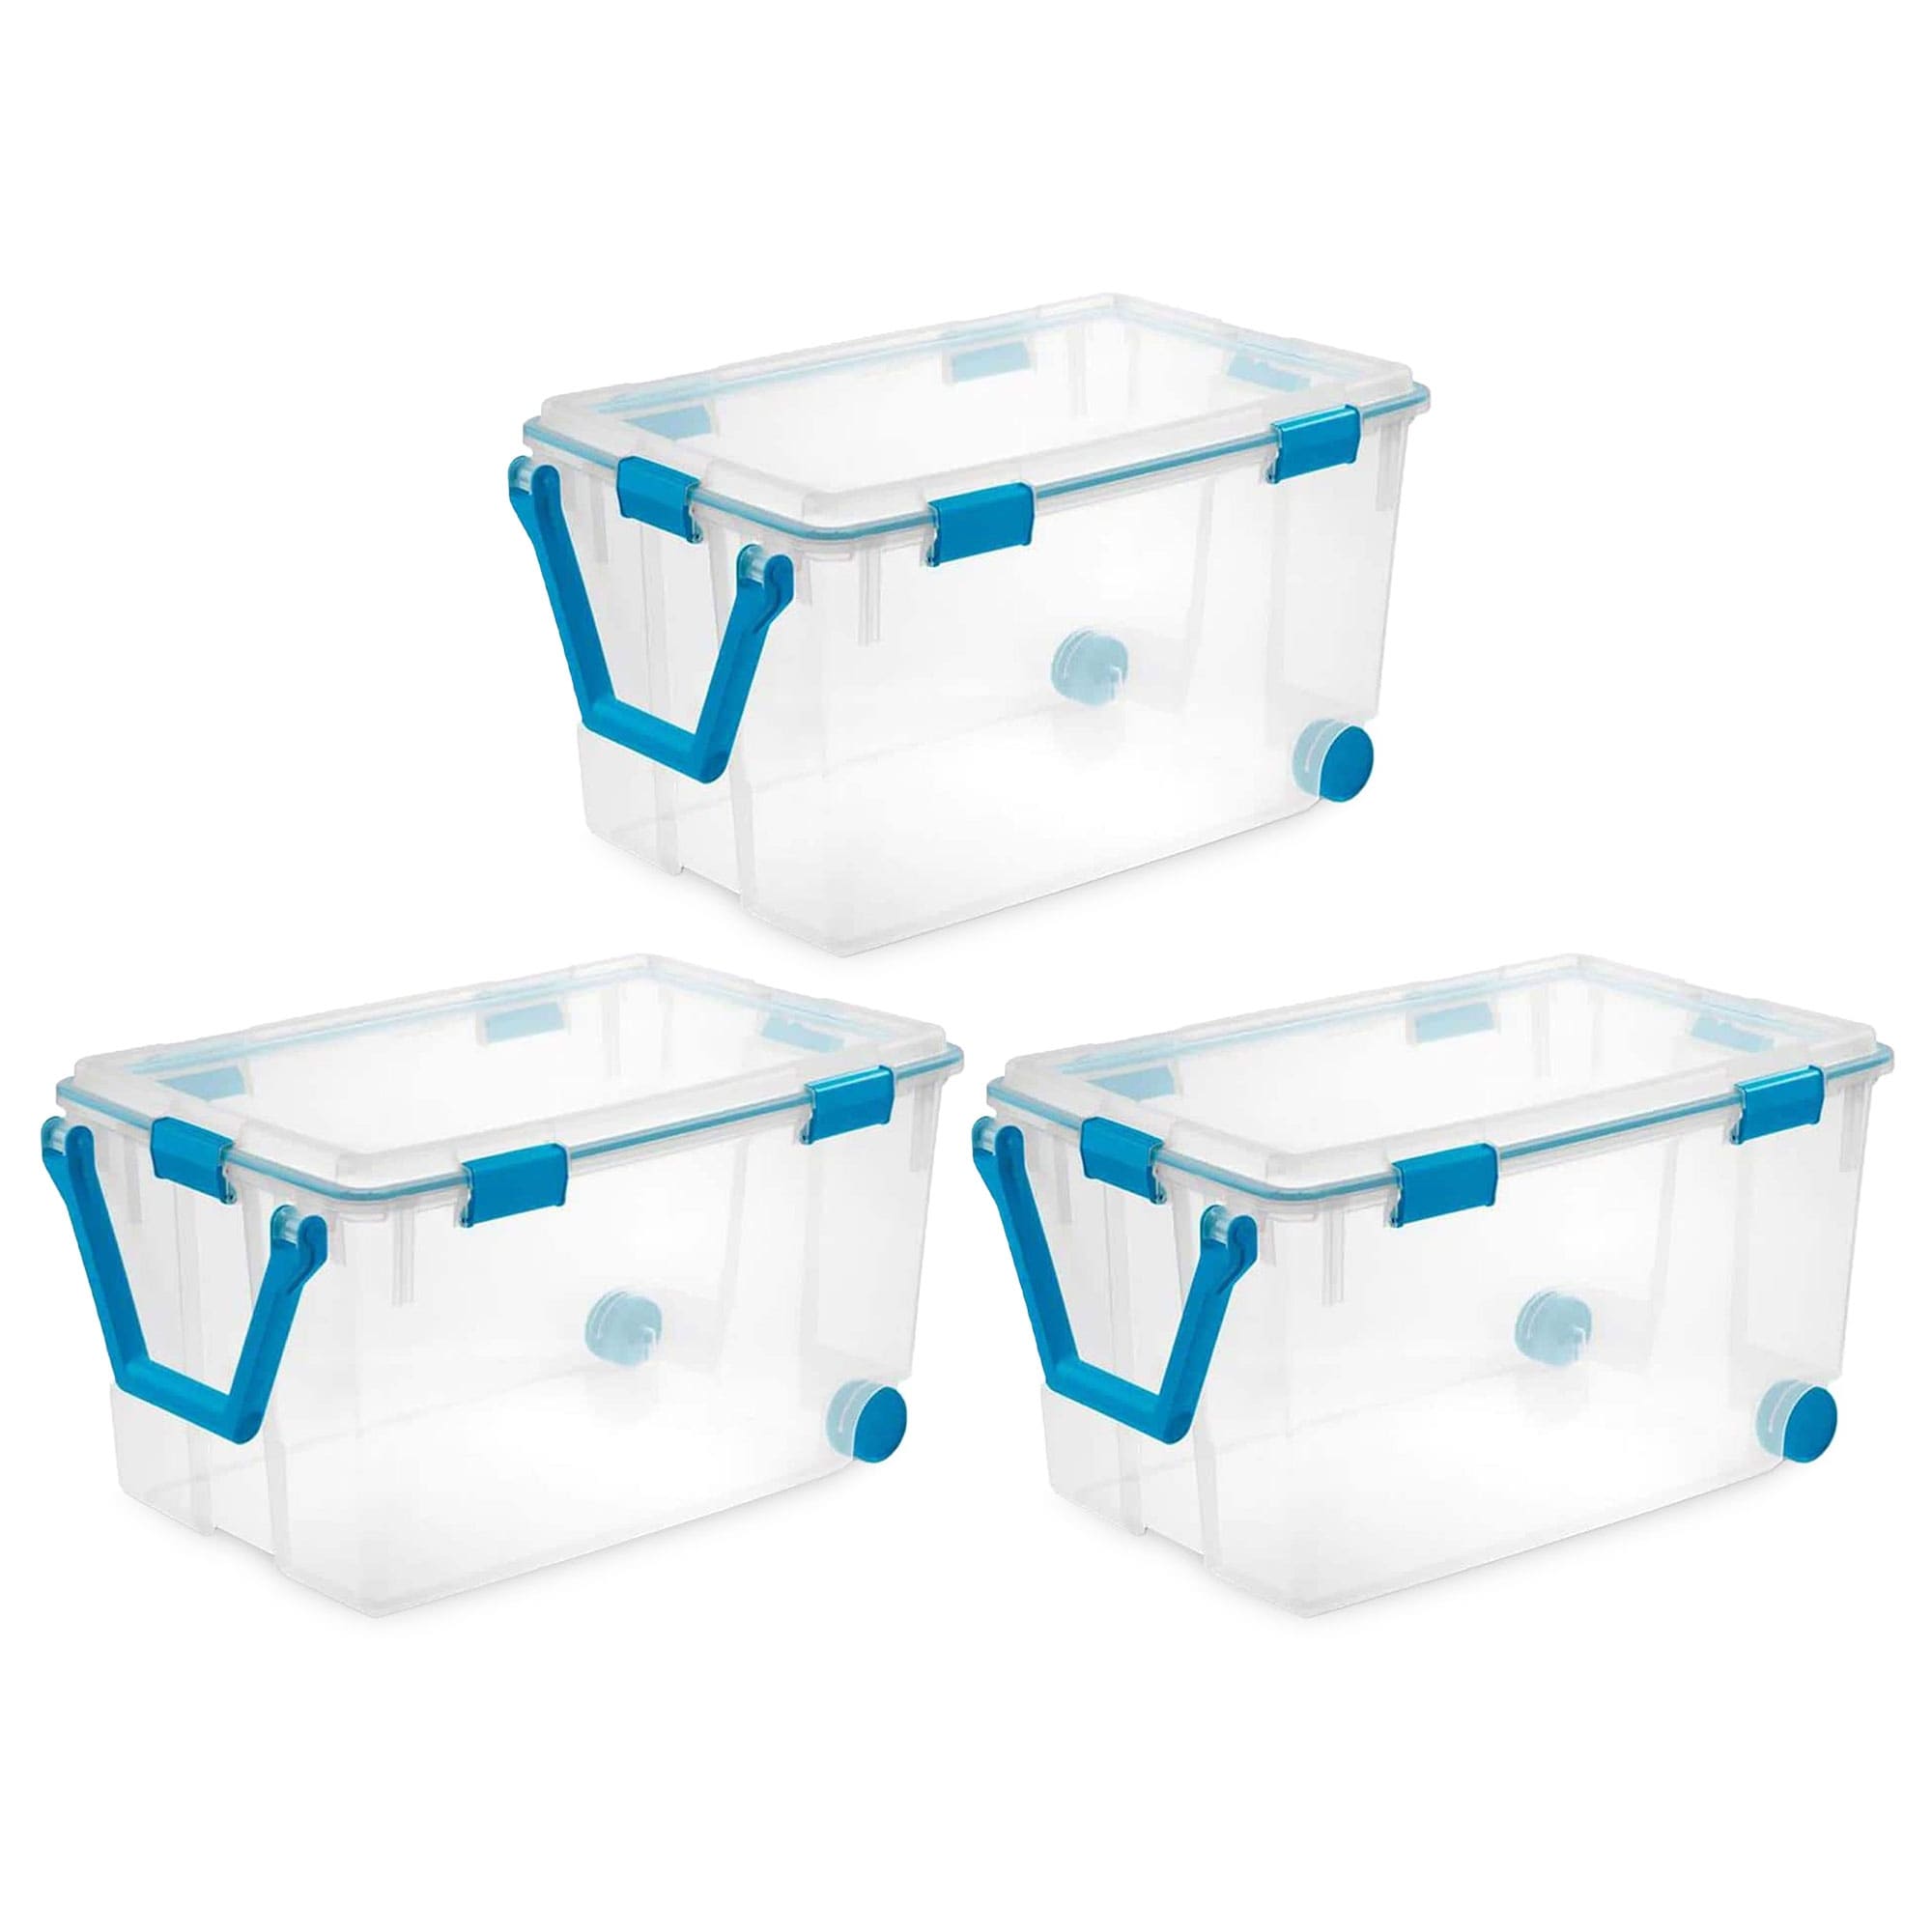 https://ak1.ostkcdn.com/images/products/is/images/direct/eae2c8da13fb06e709b40083f73762f3a7de6a7a/Sterilite-120-Qt-Clear-Plastic-Wheeled-Storage-Bin-w--Gasket-Latch-Lid%2C-%283-Pack%29.jpg